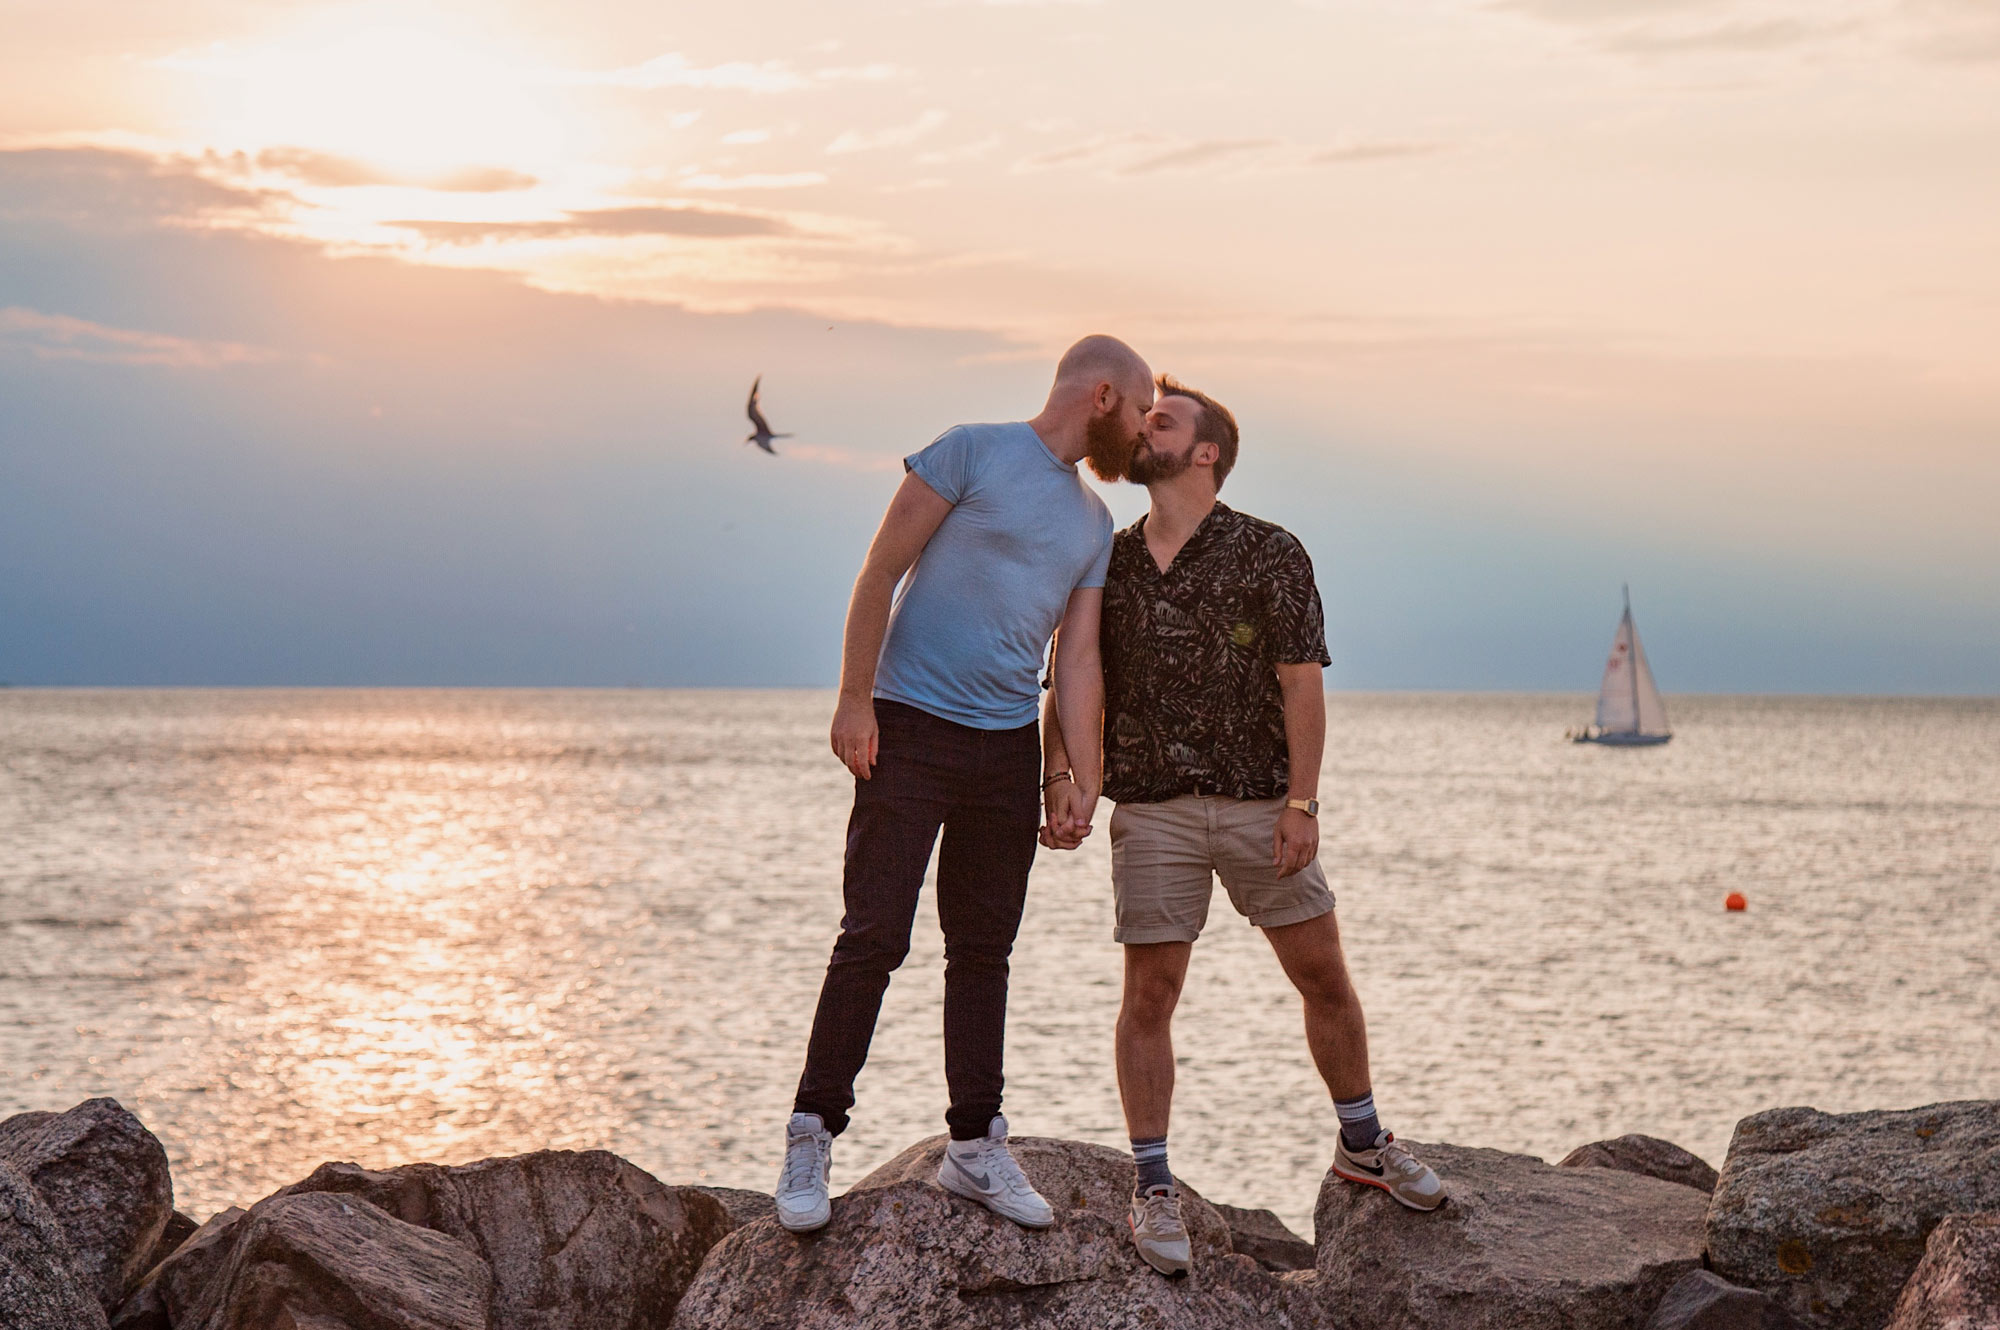 LGBTQ+ Pride: Pride LGBTQ+ rights Movement Malmö Gay City Trip South Sweden A Gay Kiss during Sunset over the Baltic Sea © Coupleofmen.com/ Photo: Maartje Hensen